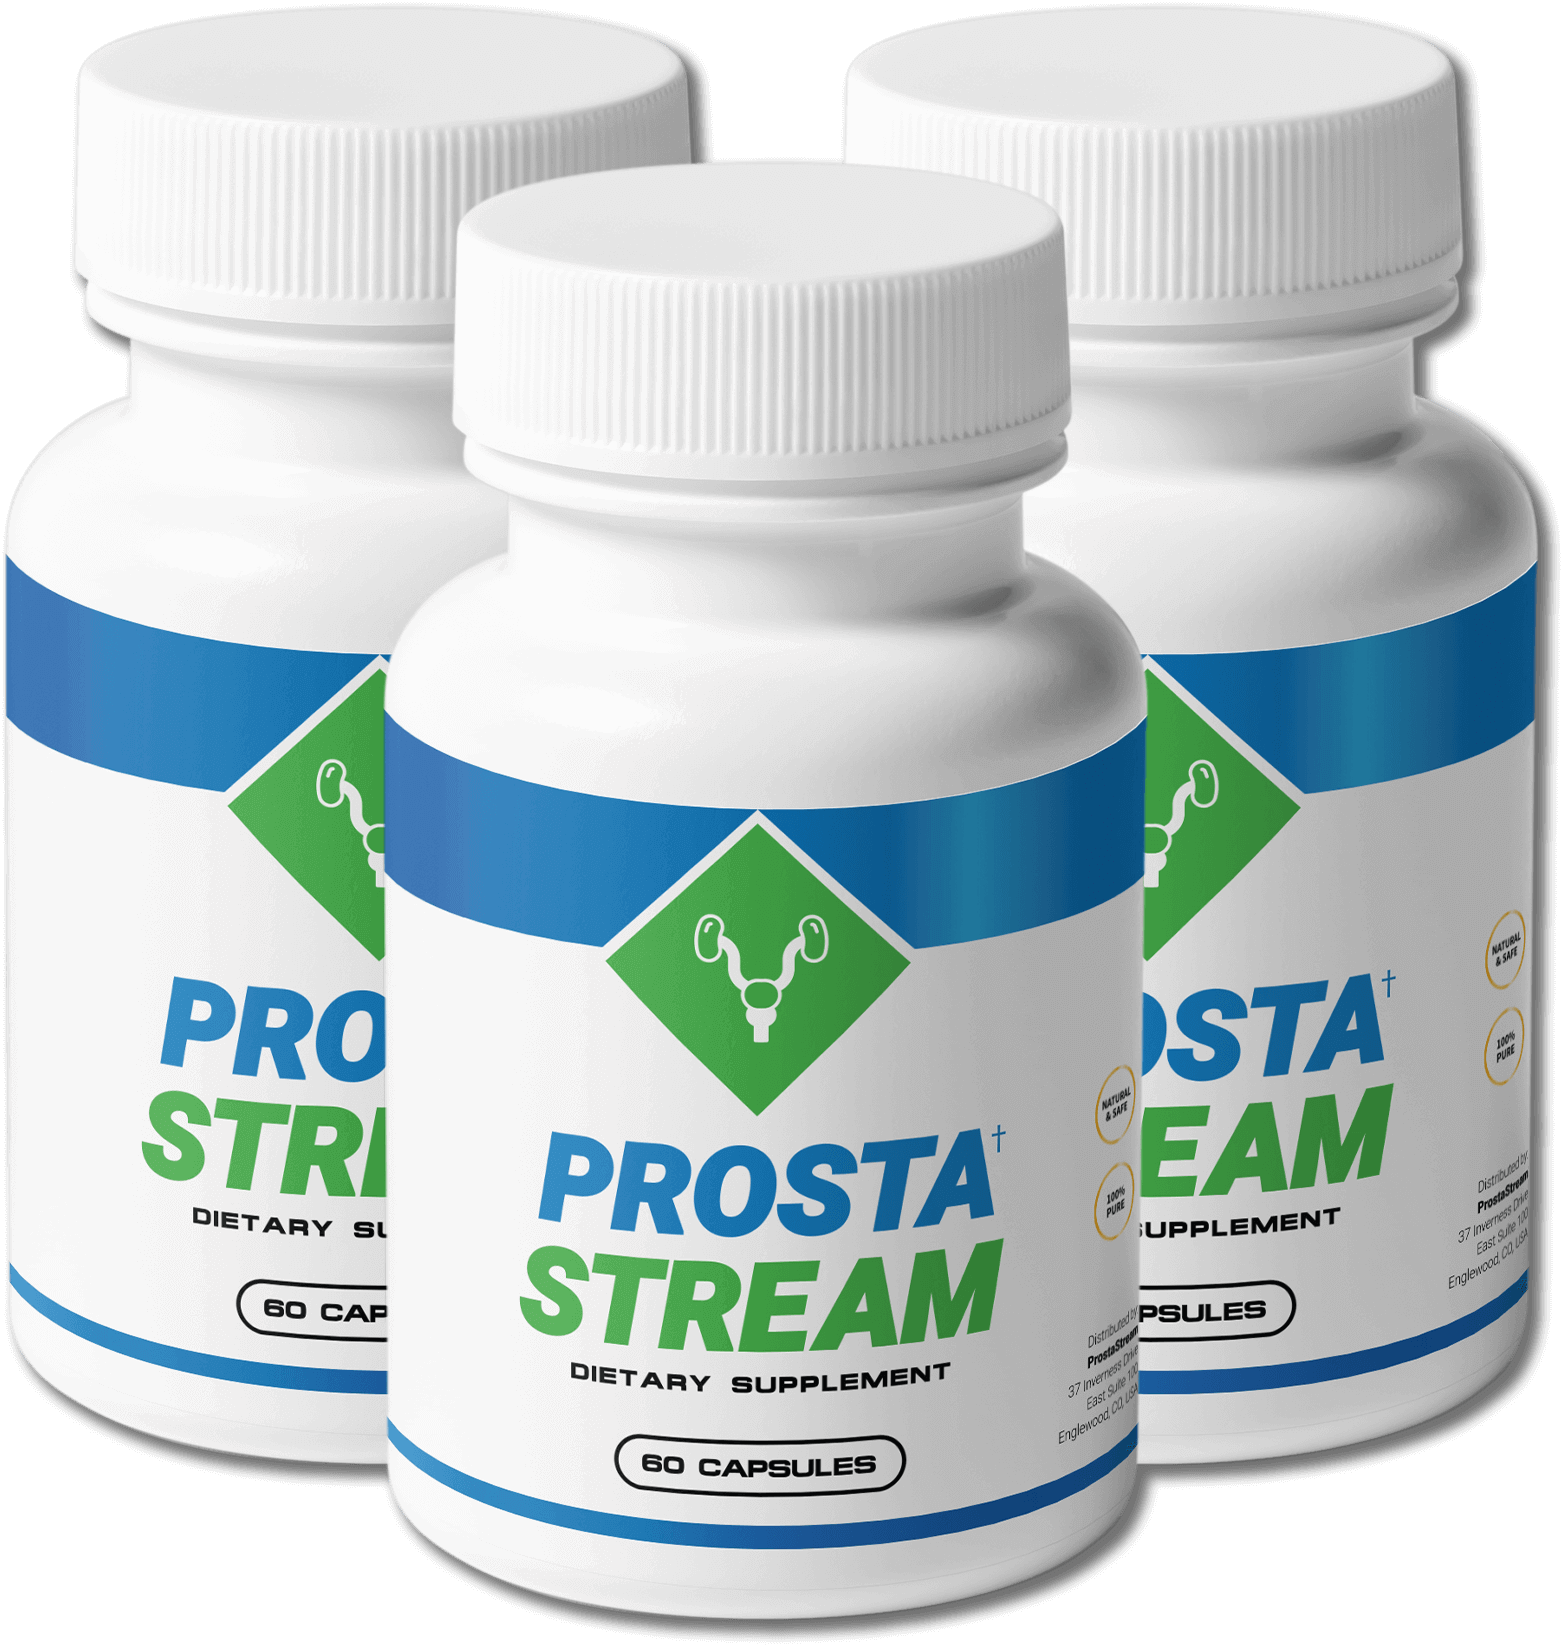 ProstaStream dietary supplement support a healthy prostate